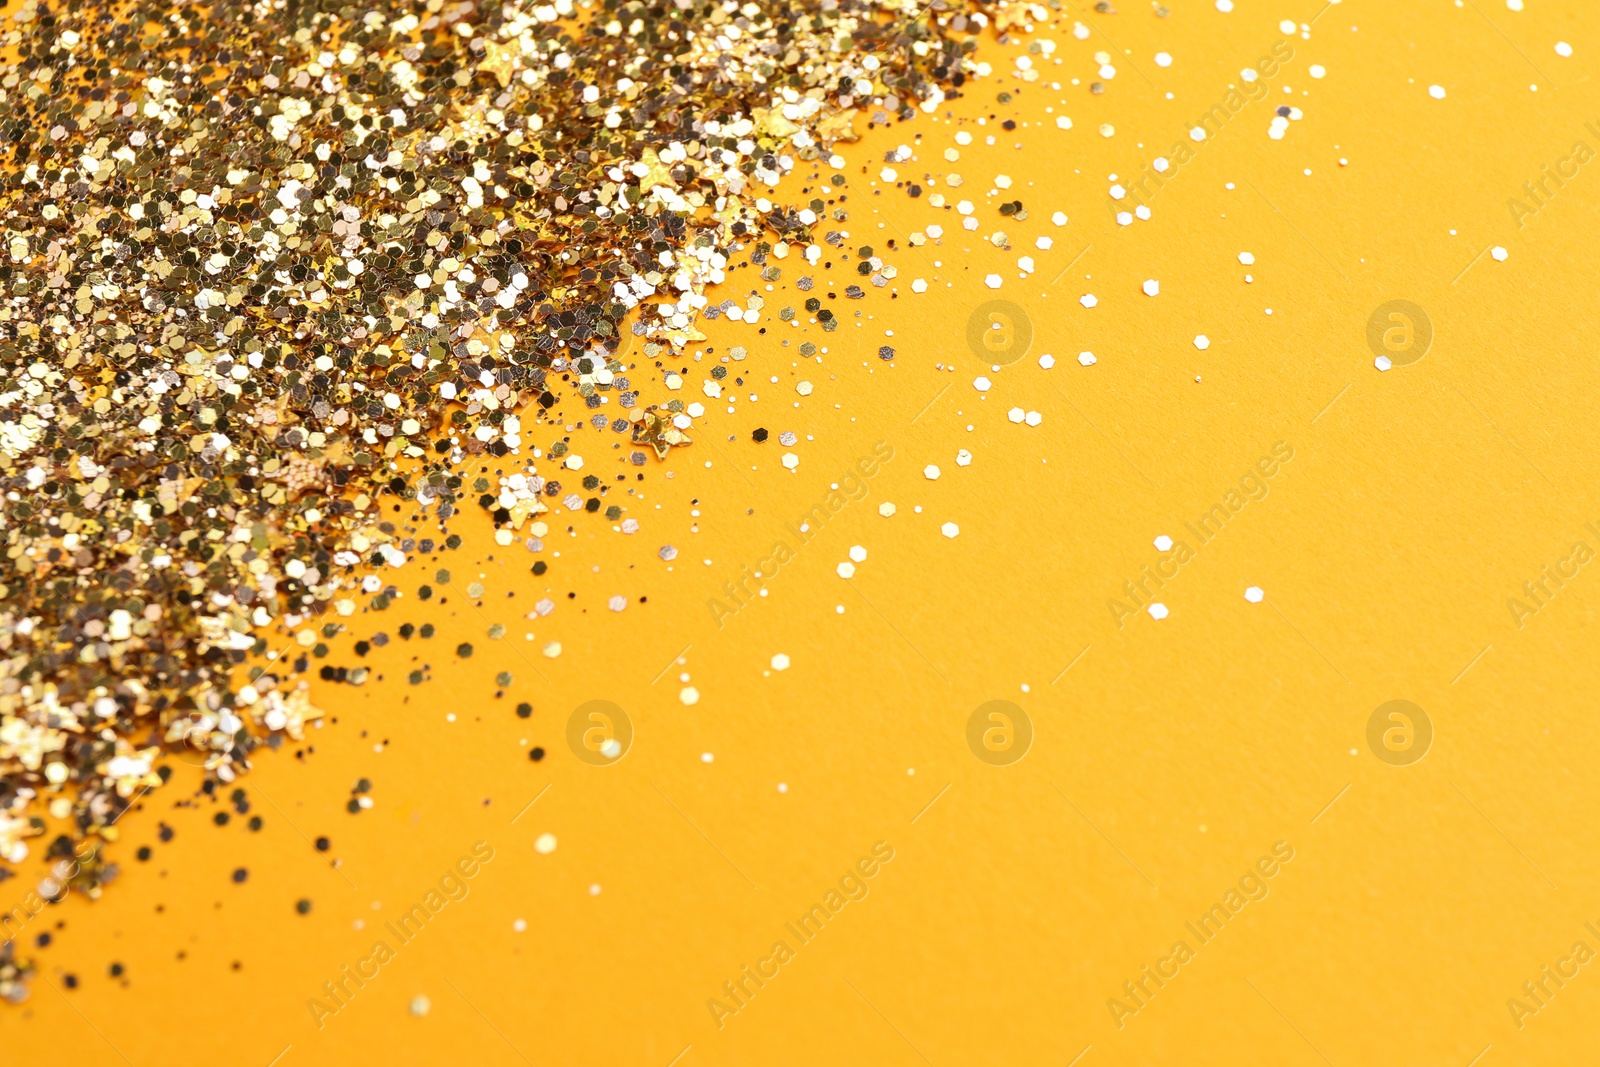 Photo of Shiny bright golden glitter on pale orange background. Space for text